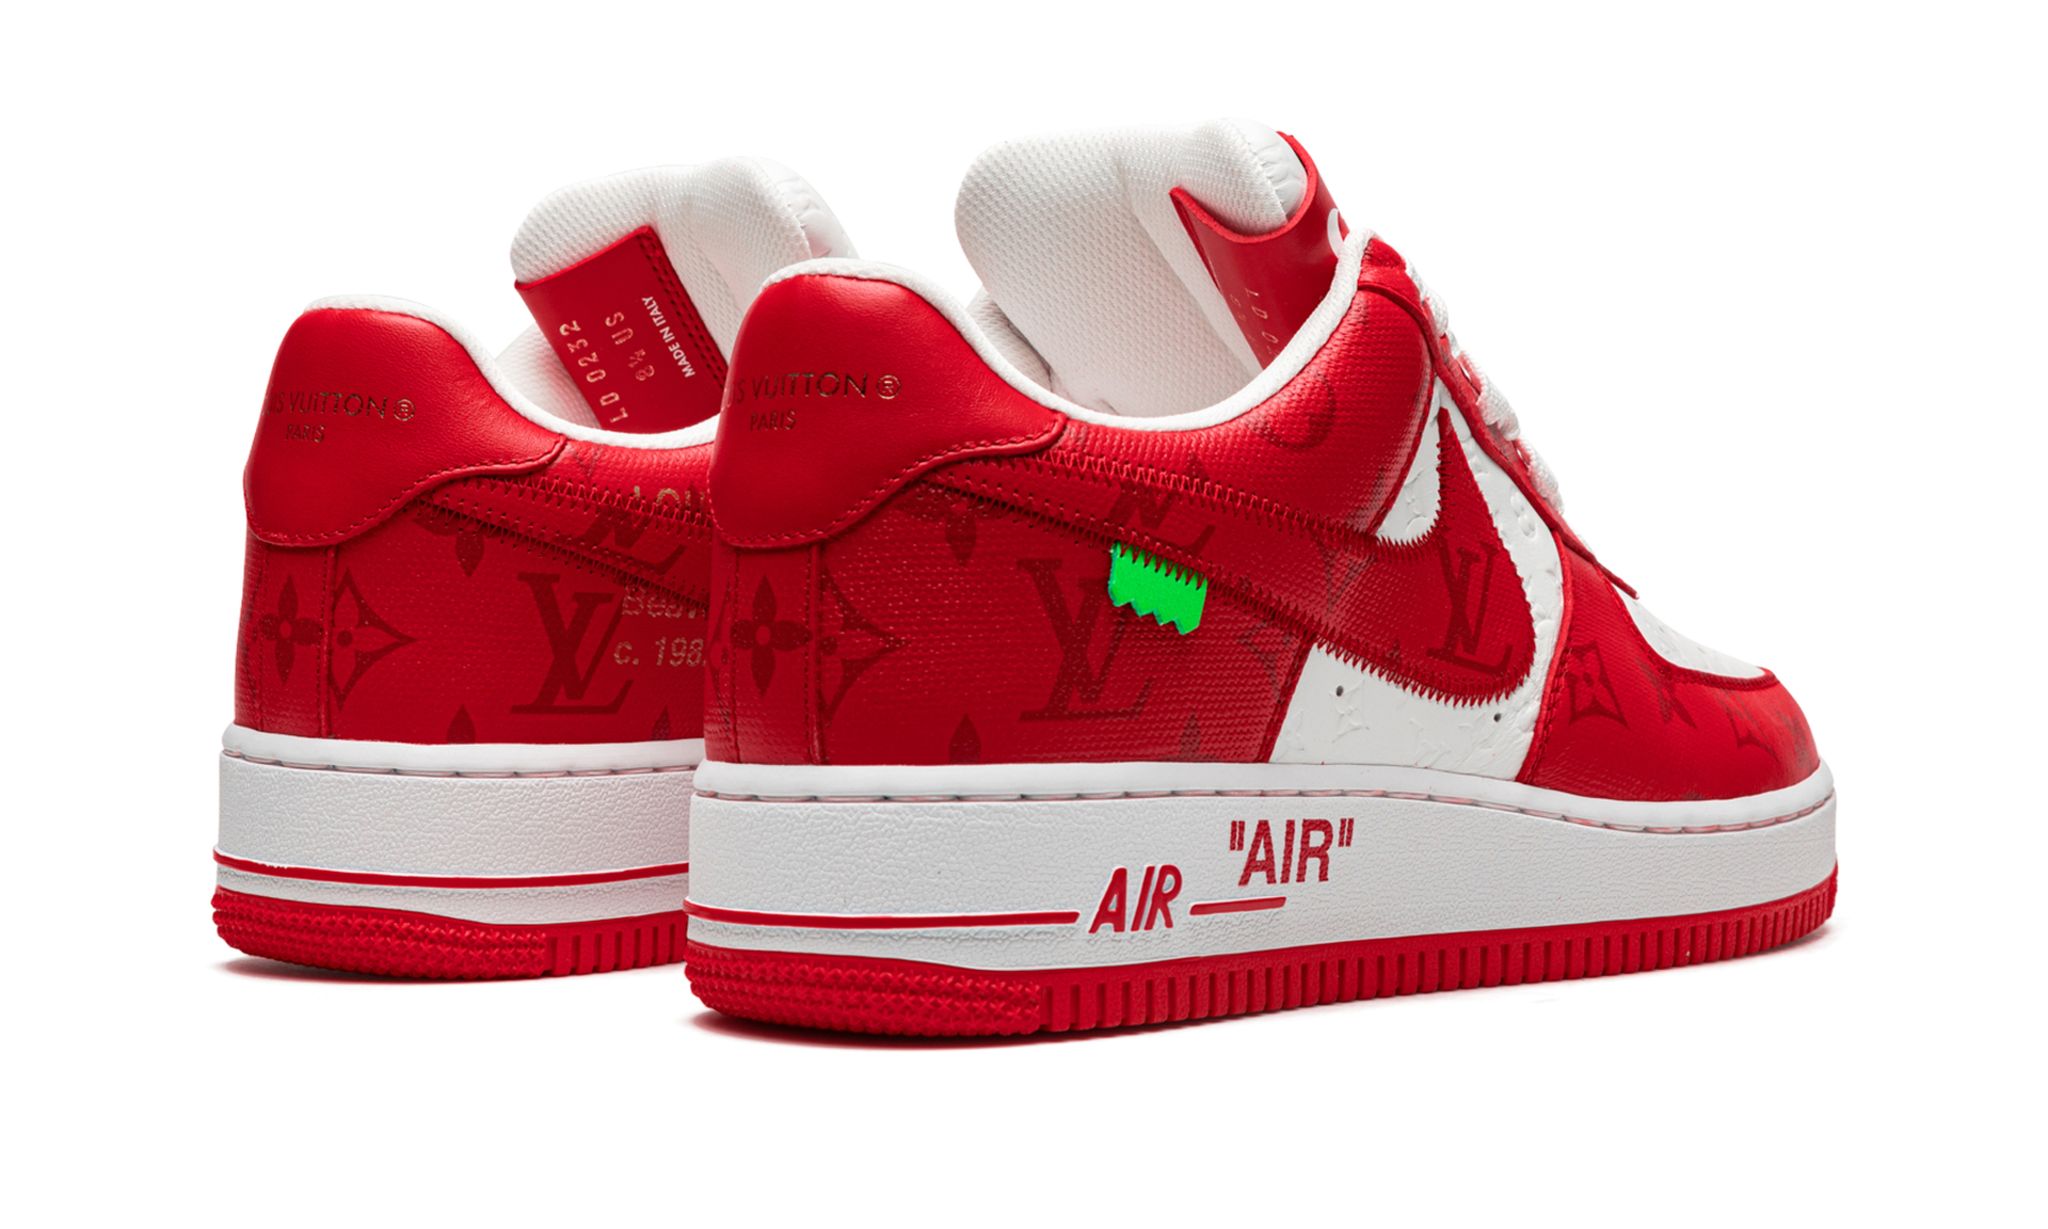 Louis Vuitton Nike Air Force 1 Low By Virgil Abloh White Red